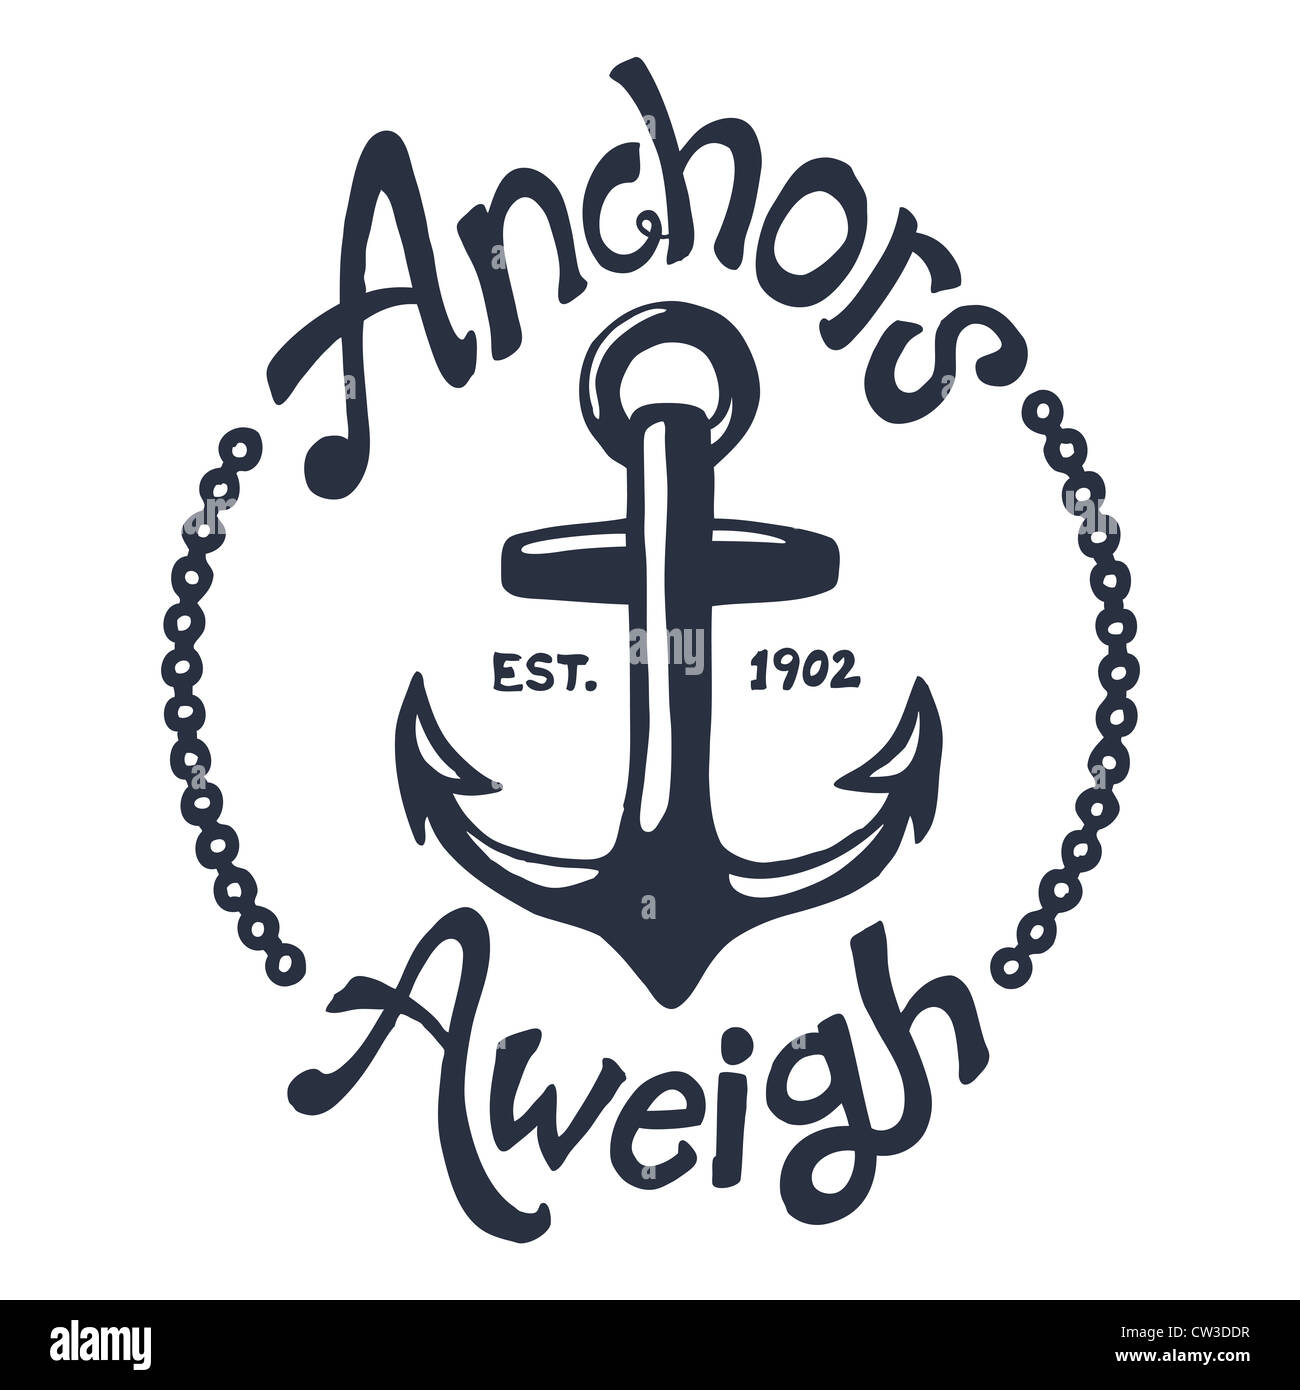 Vintage style nautical anchor and text design Stock Photo